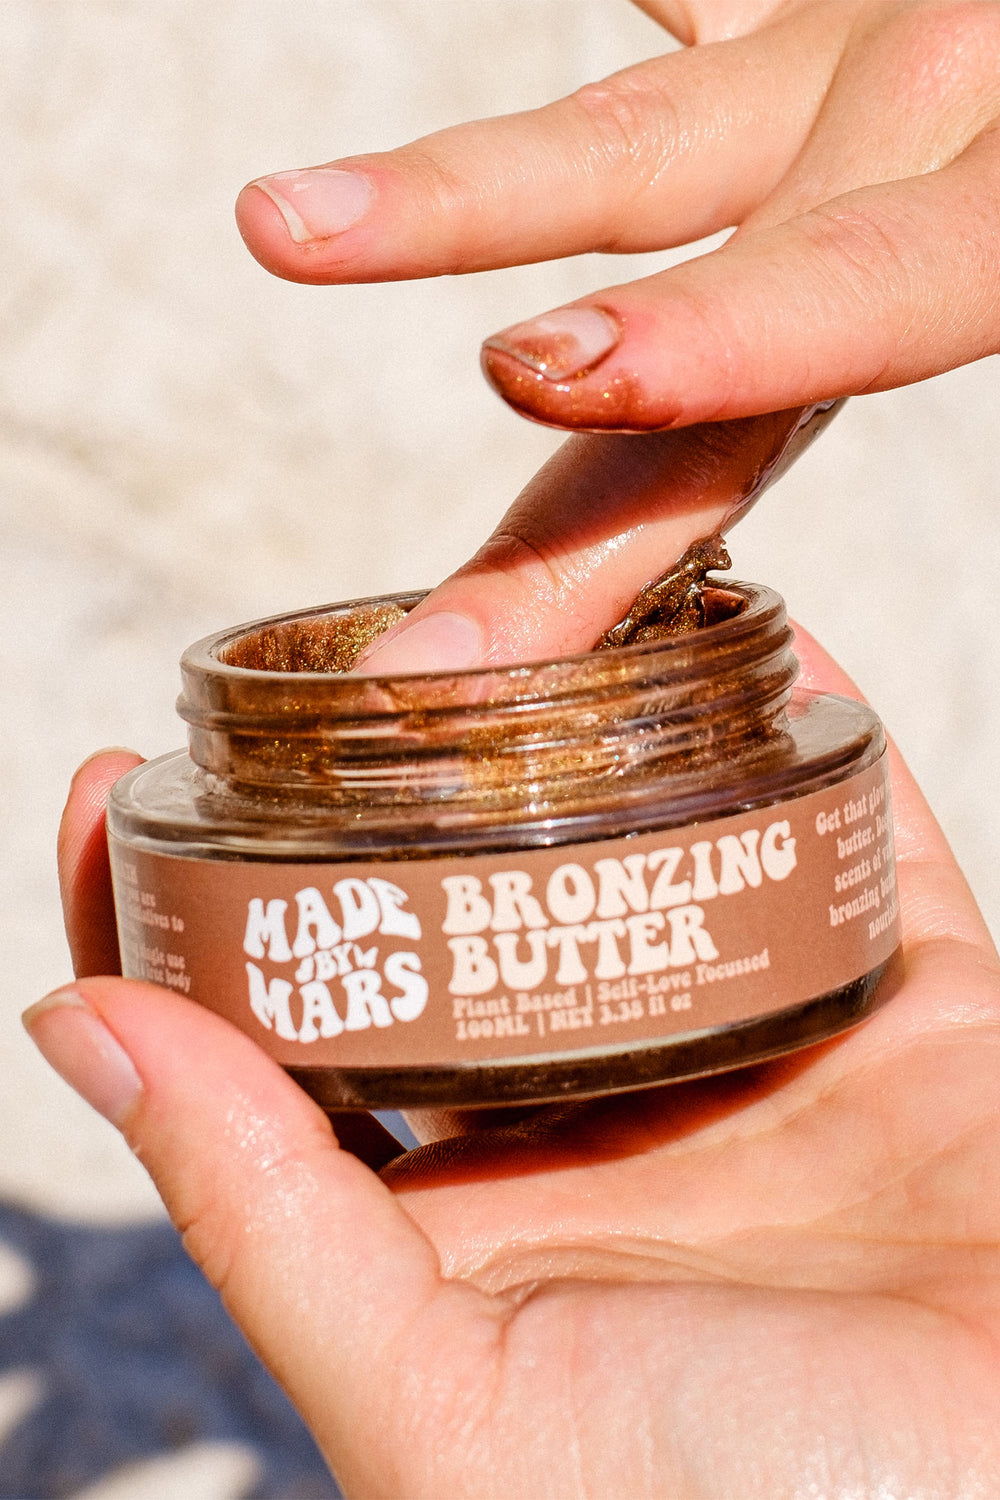 Made by Mars Bronzing Butter 100ml